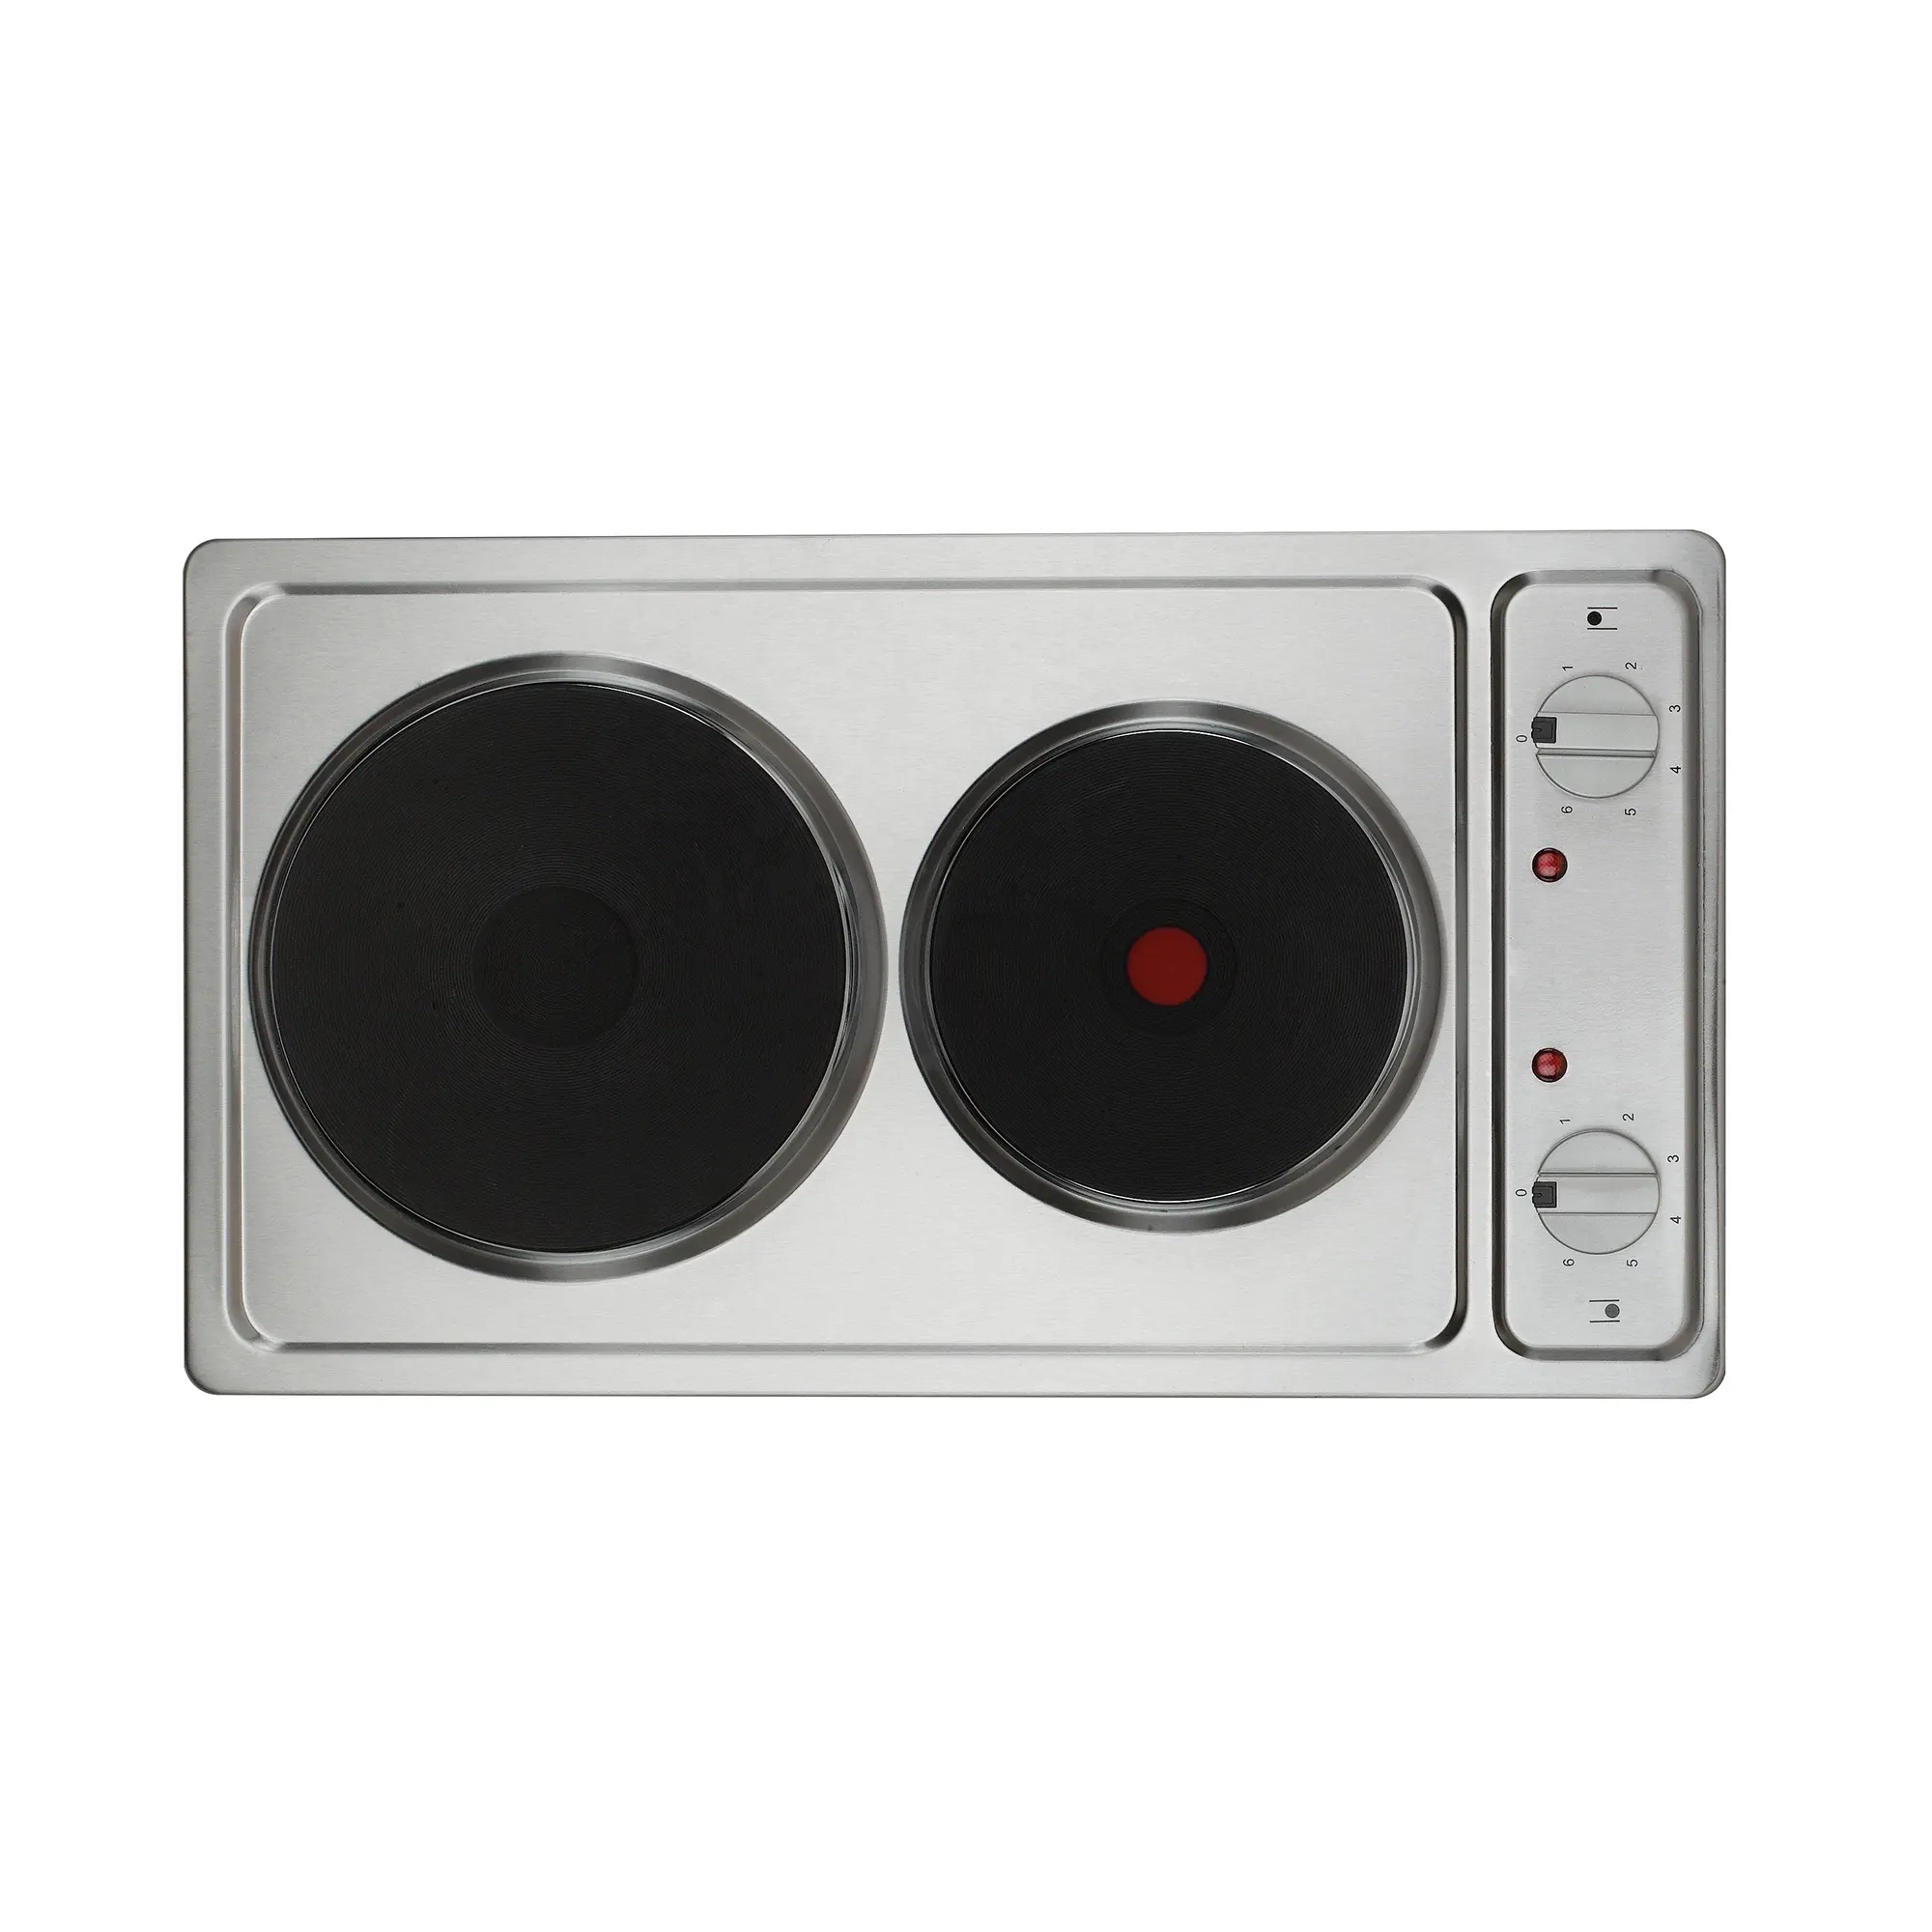 Hotplate with 2 Zones Induction Heating Cooktop Stove with Downdraft Gas Burner Cast Iron Built in Electric Solid Home Hot Plate